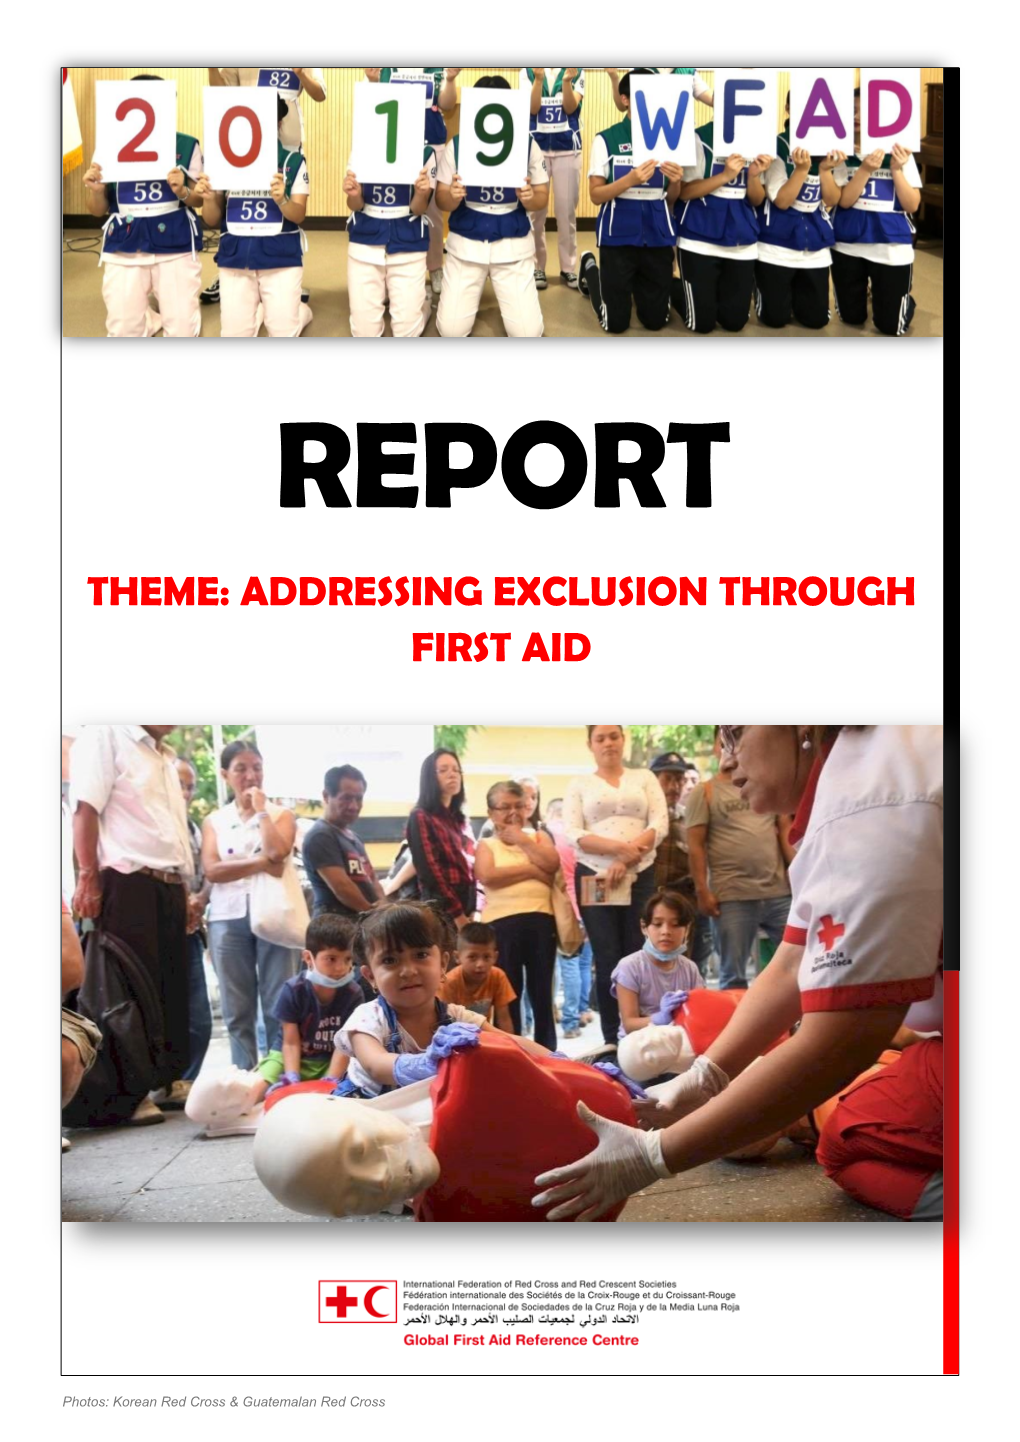 Theme: Addressing Exclusion Through First Aid